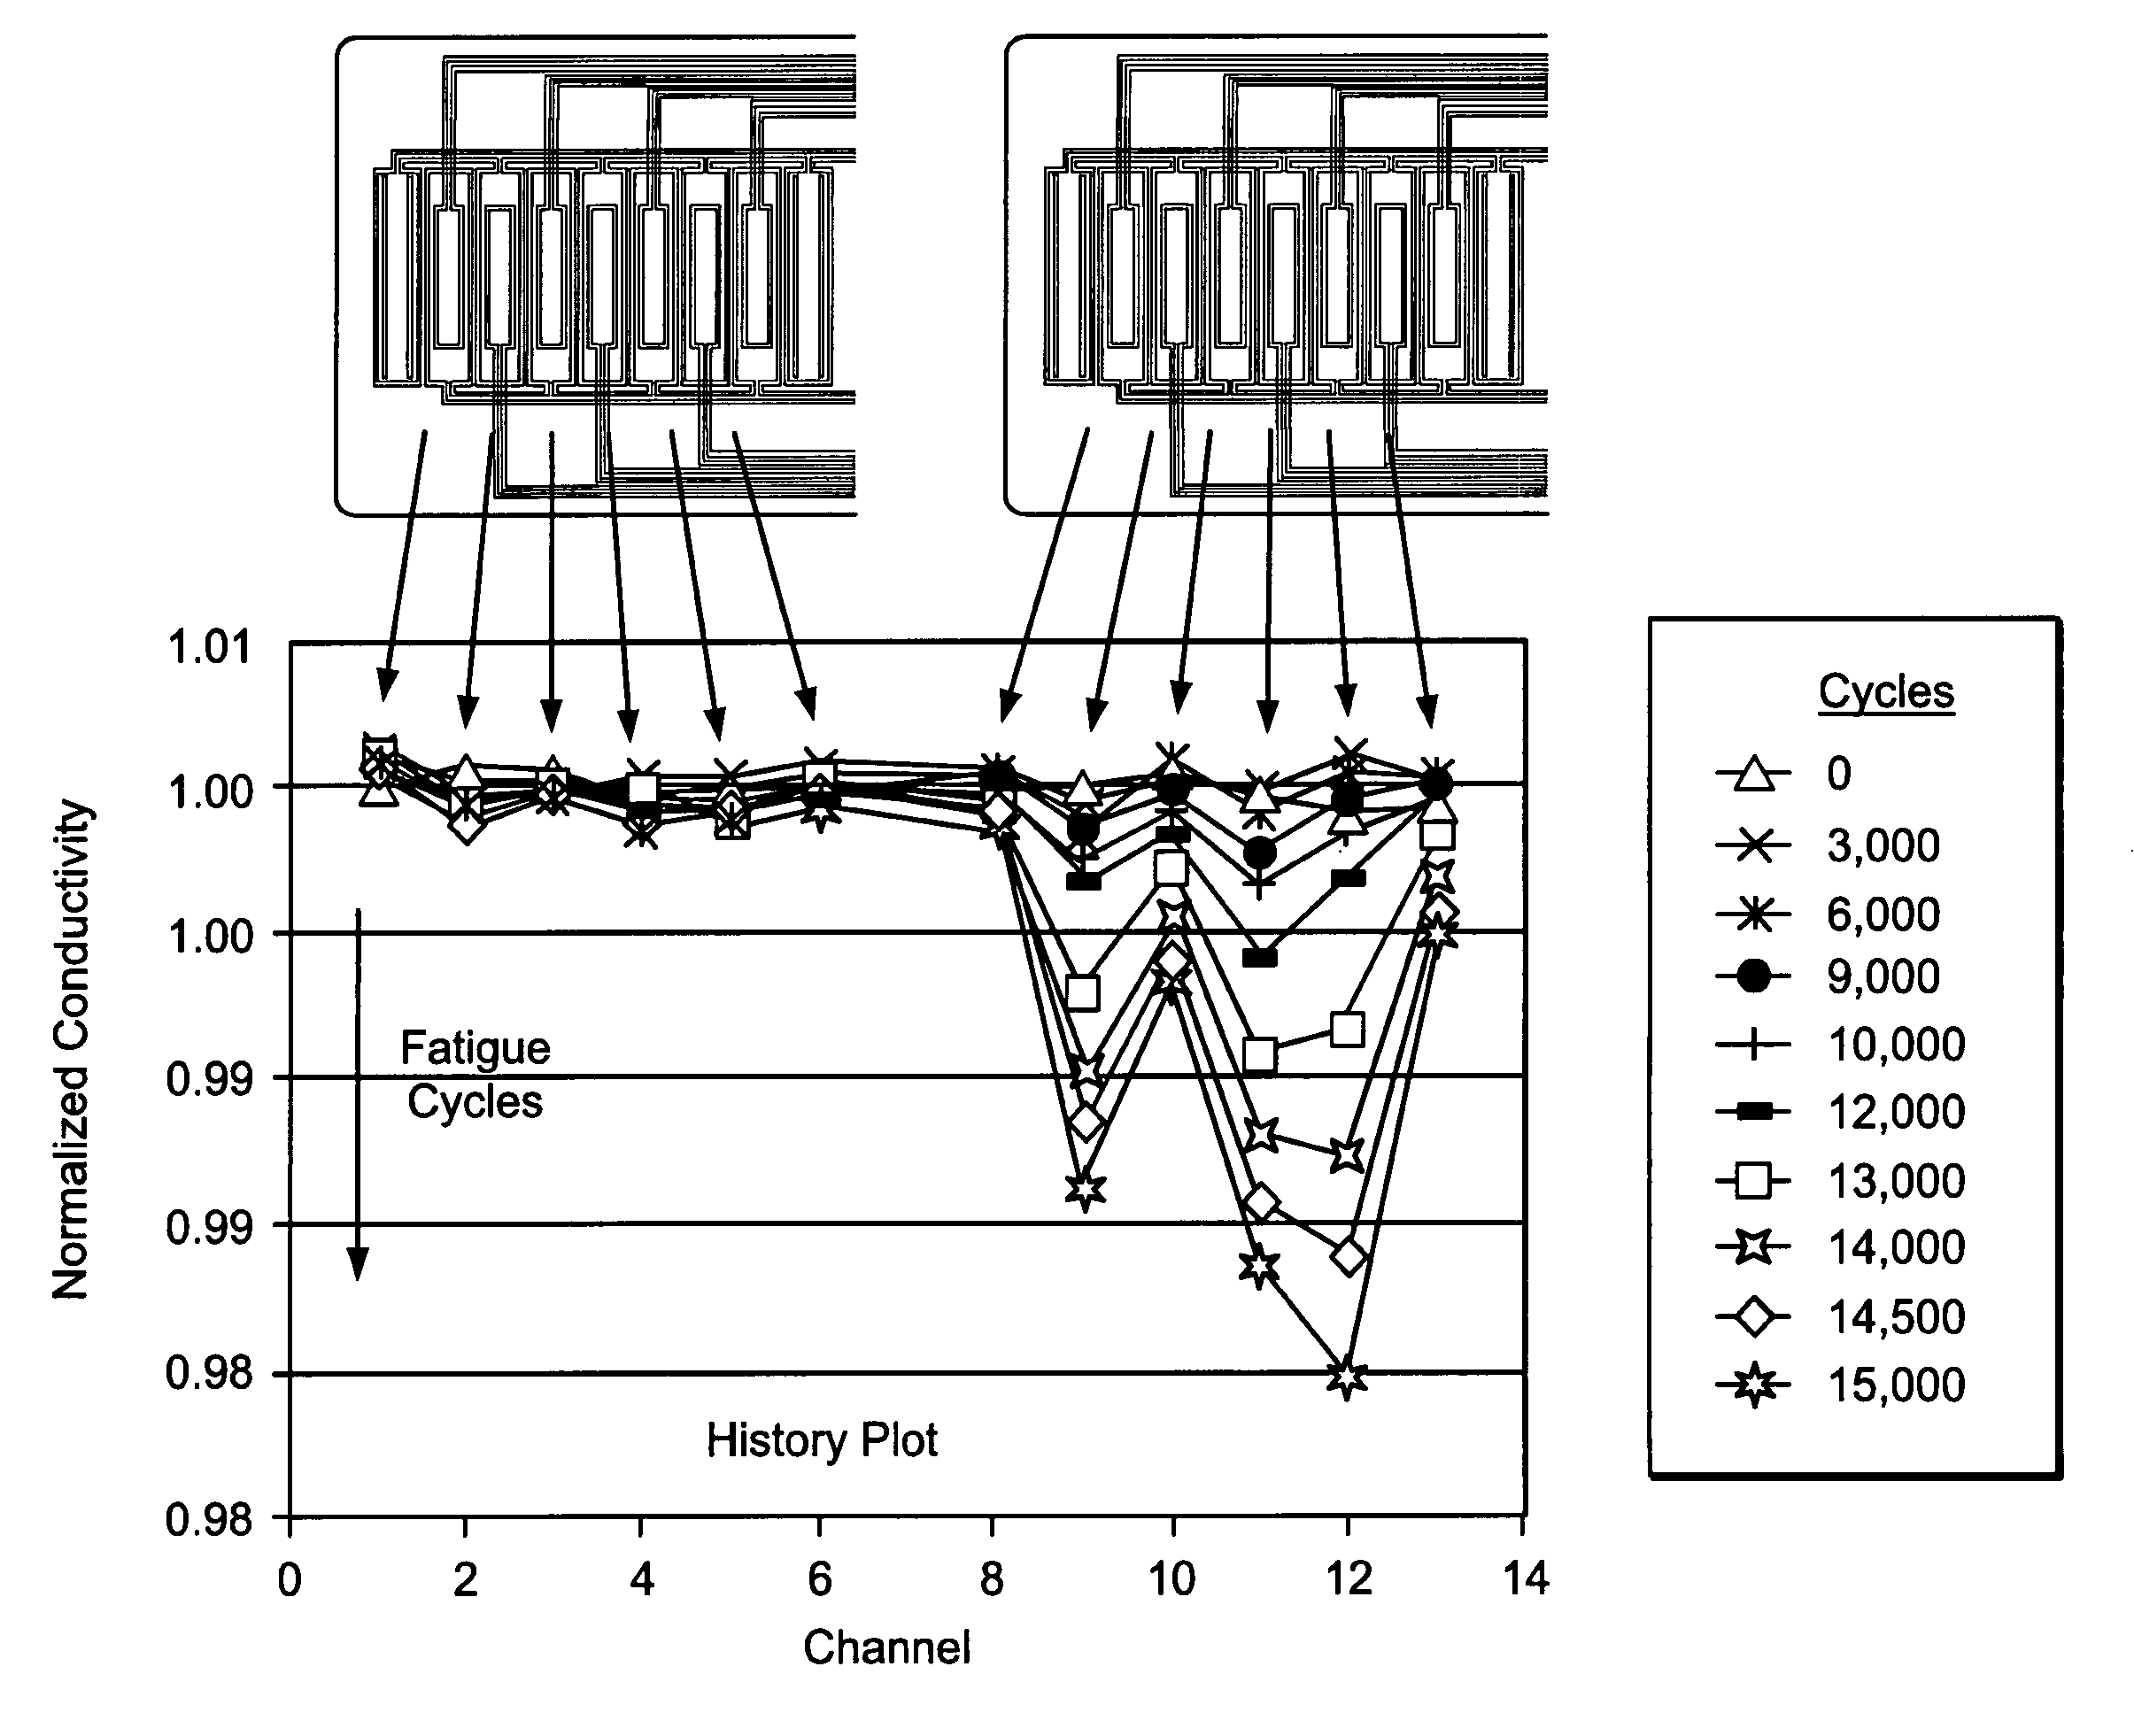 Fabrication of samples having predetermined material conditions